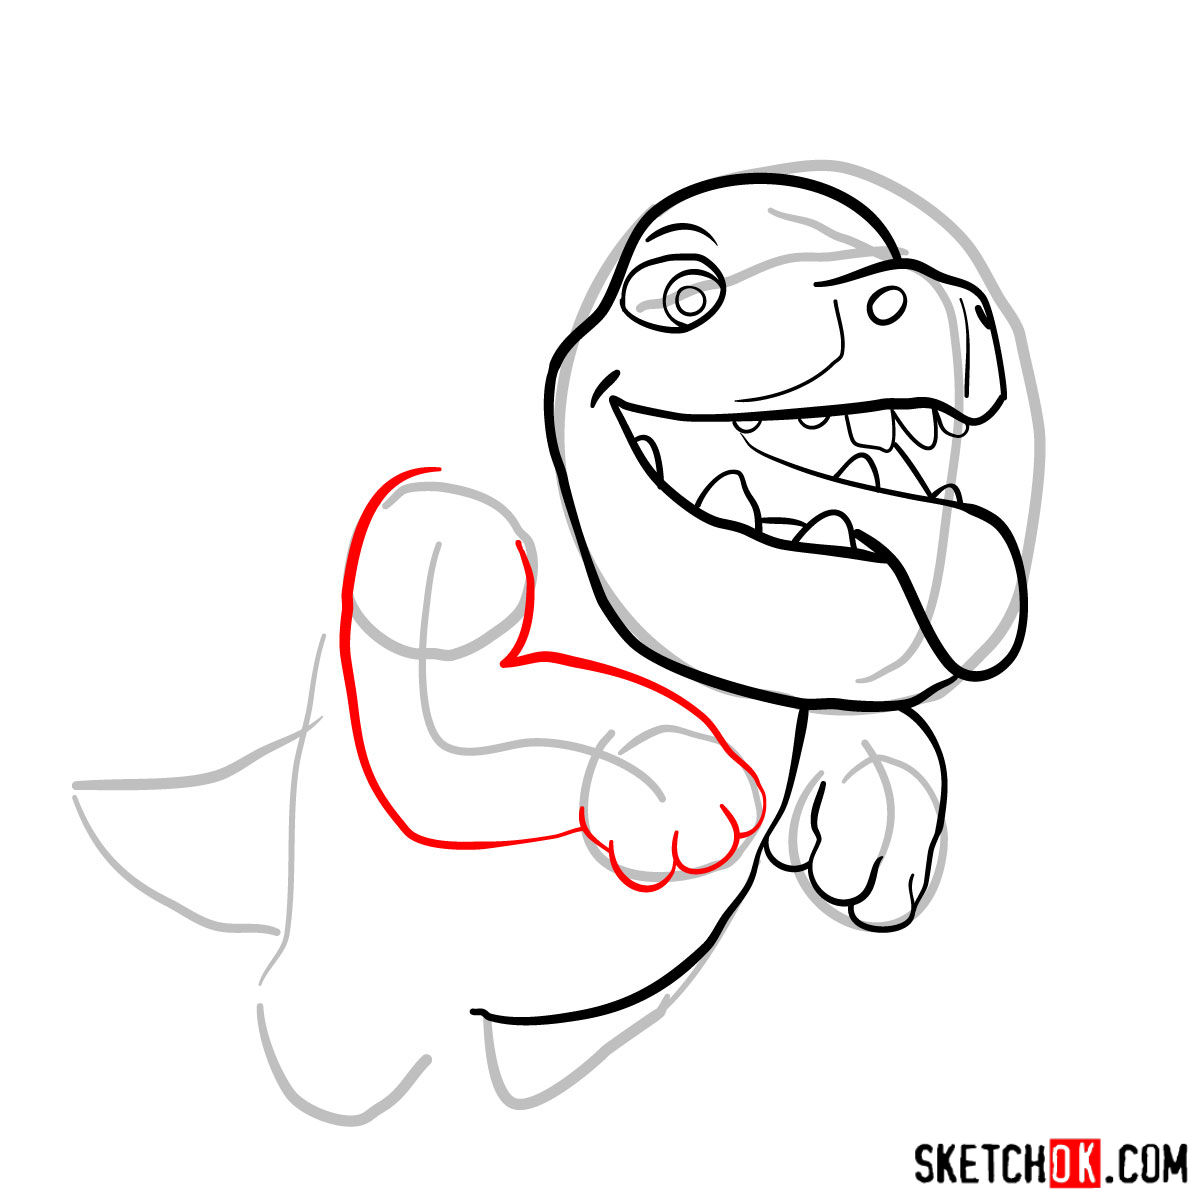 How to draw Baby Dragon from Clash of Clans - step 05